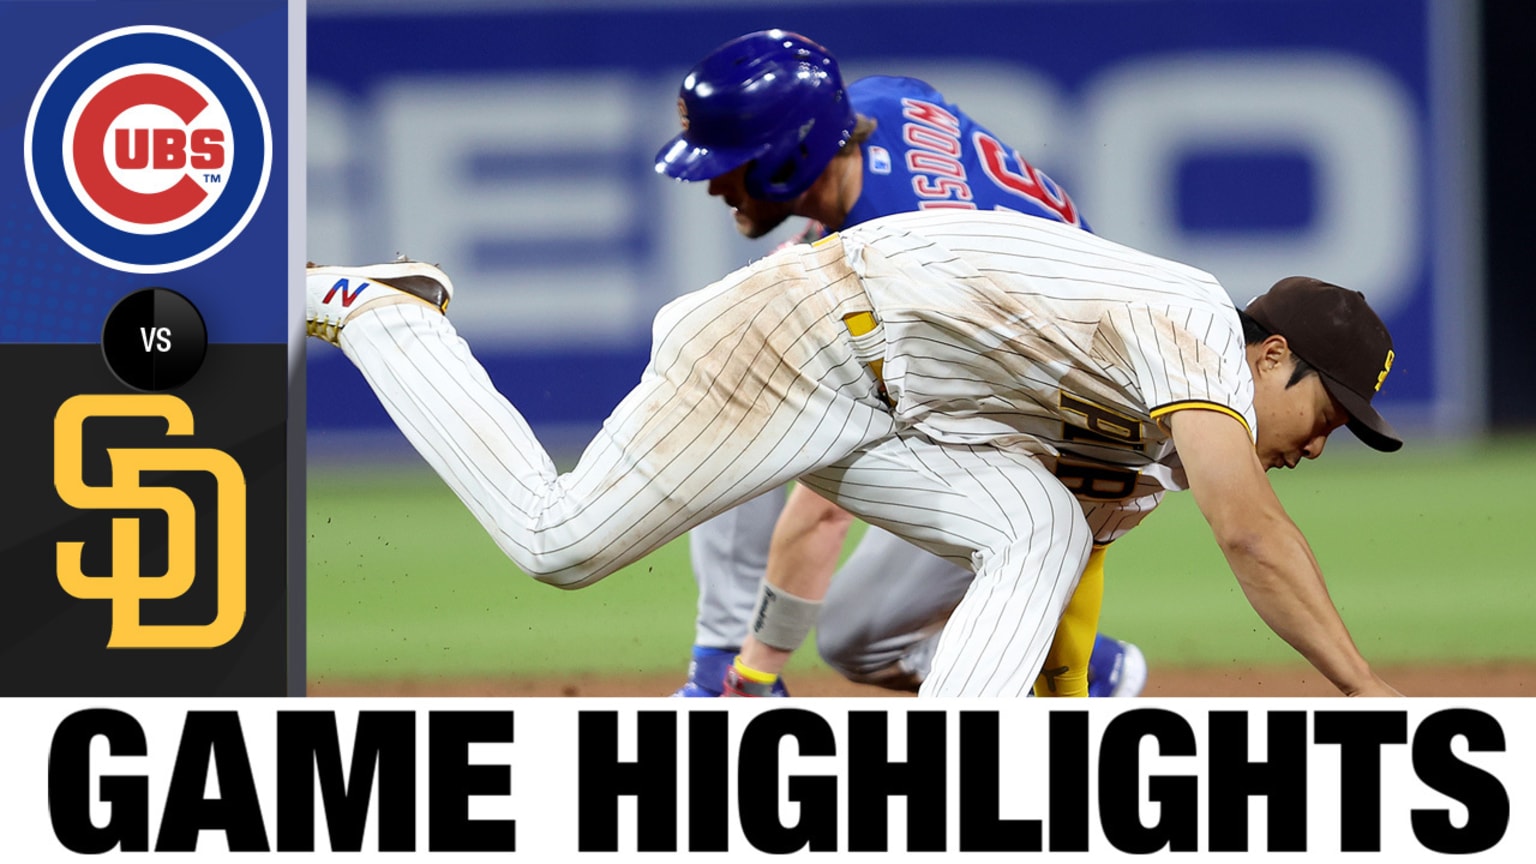 Cubs vs. Padres Highlights 05/10/2022 San Diego Padres